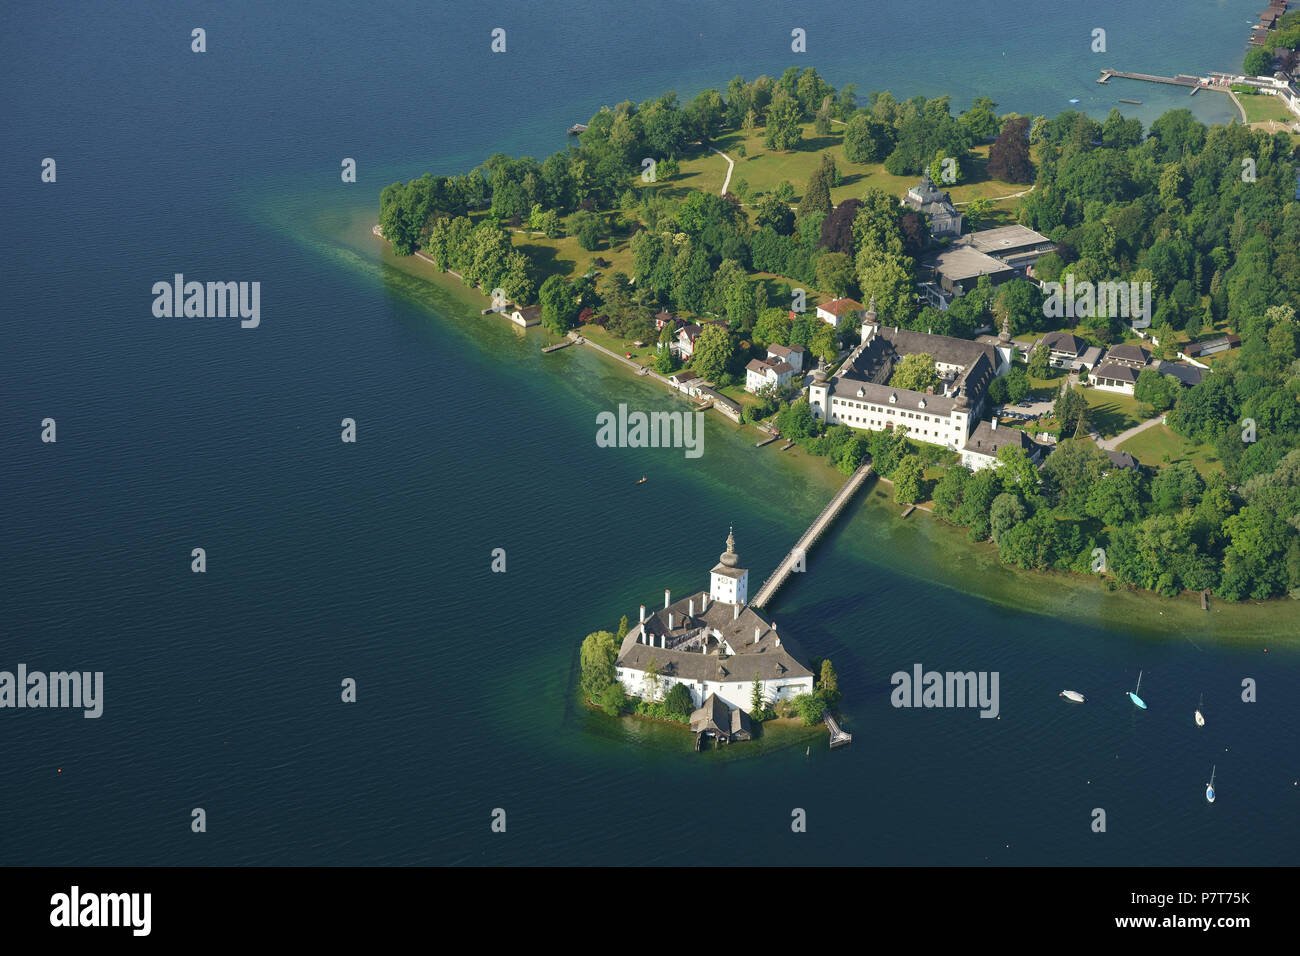 AERIAL VIEW. Medieval castle on a lake with a footbridge for access. Ort Castle, Gmunden, Traunsee (lake), Upper Austria, Austria. Stock Photo